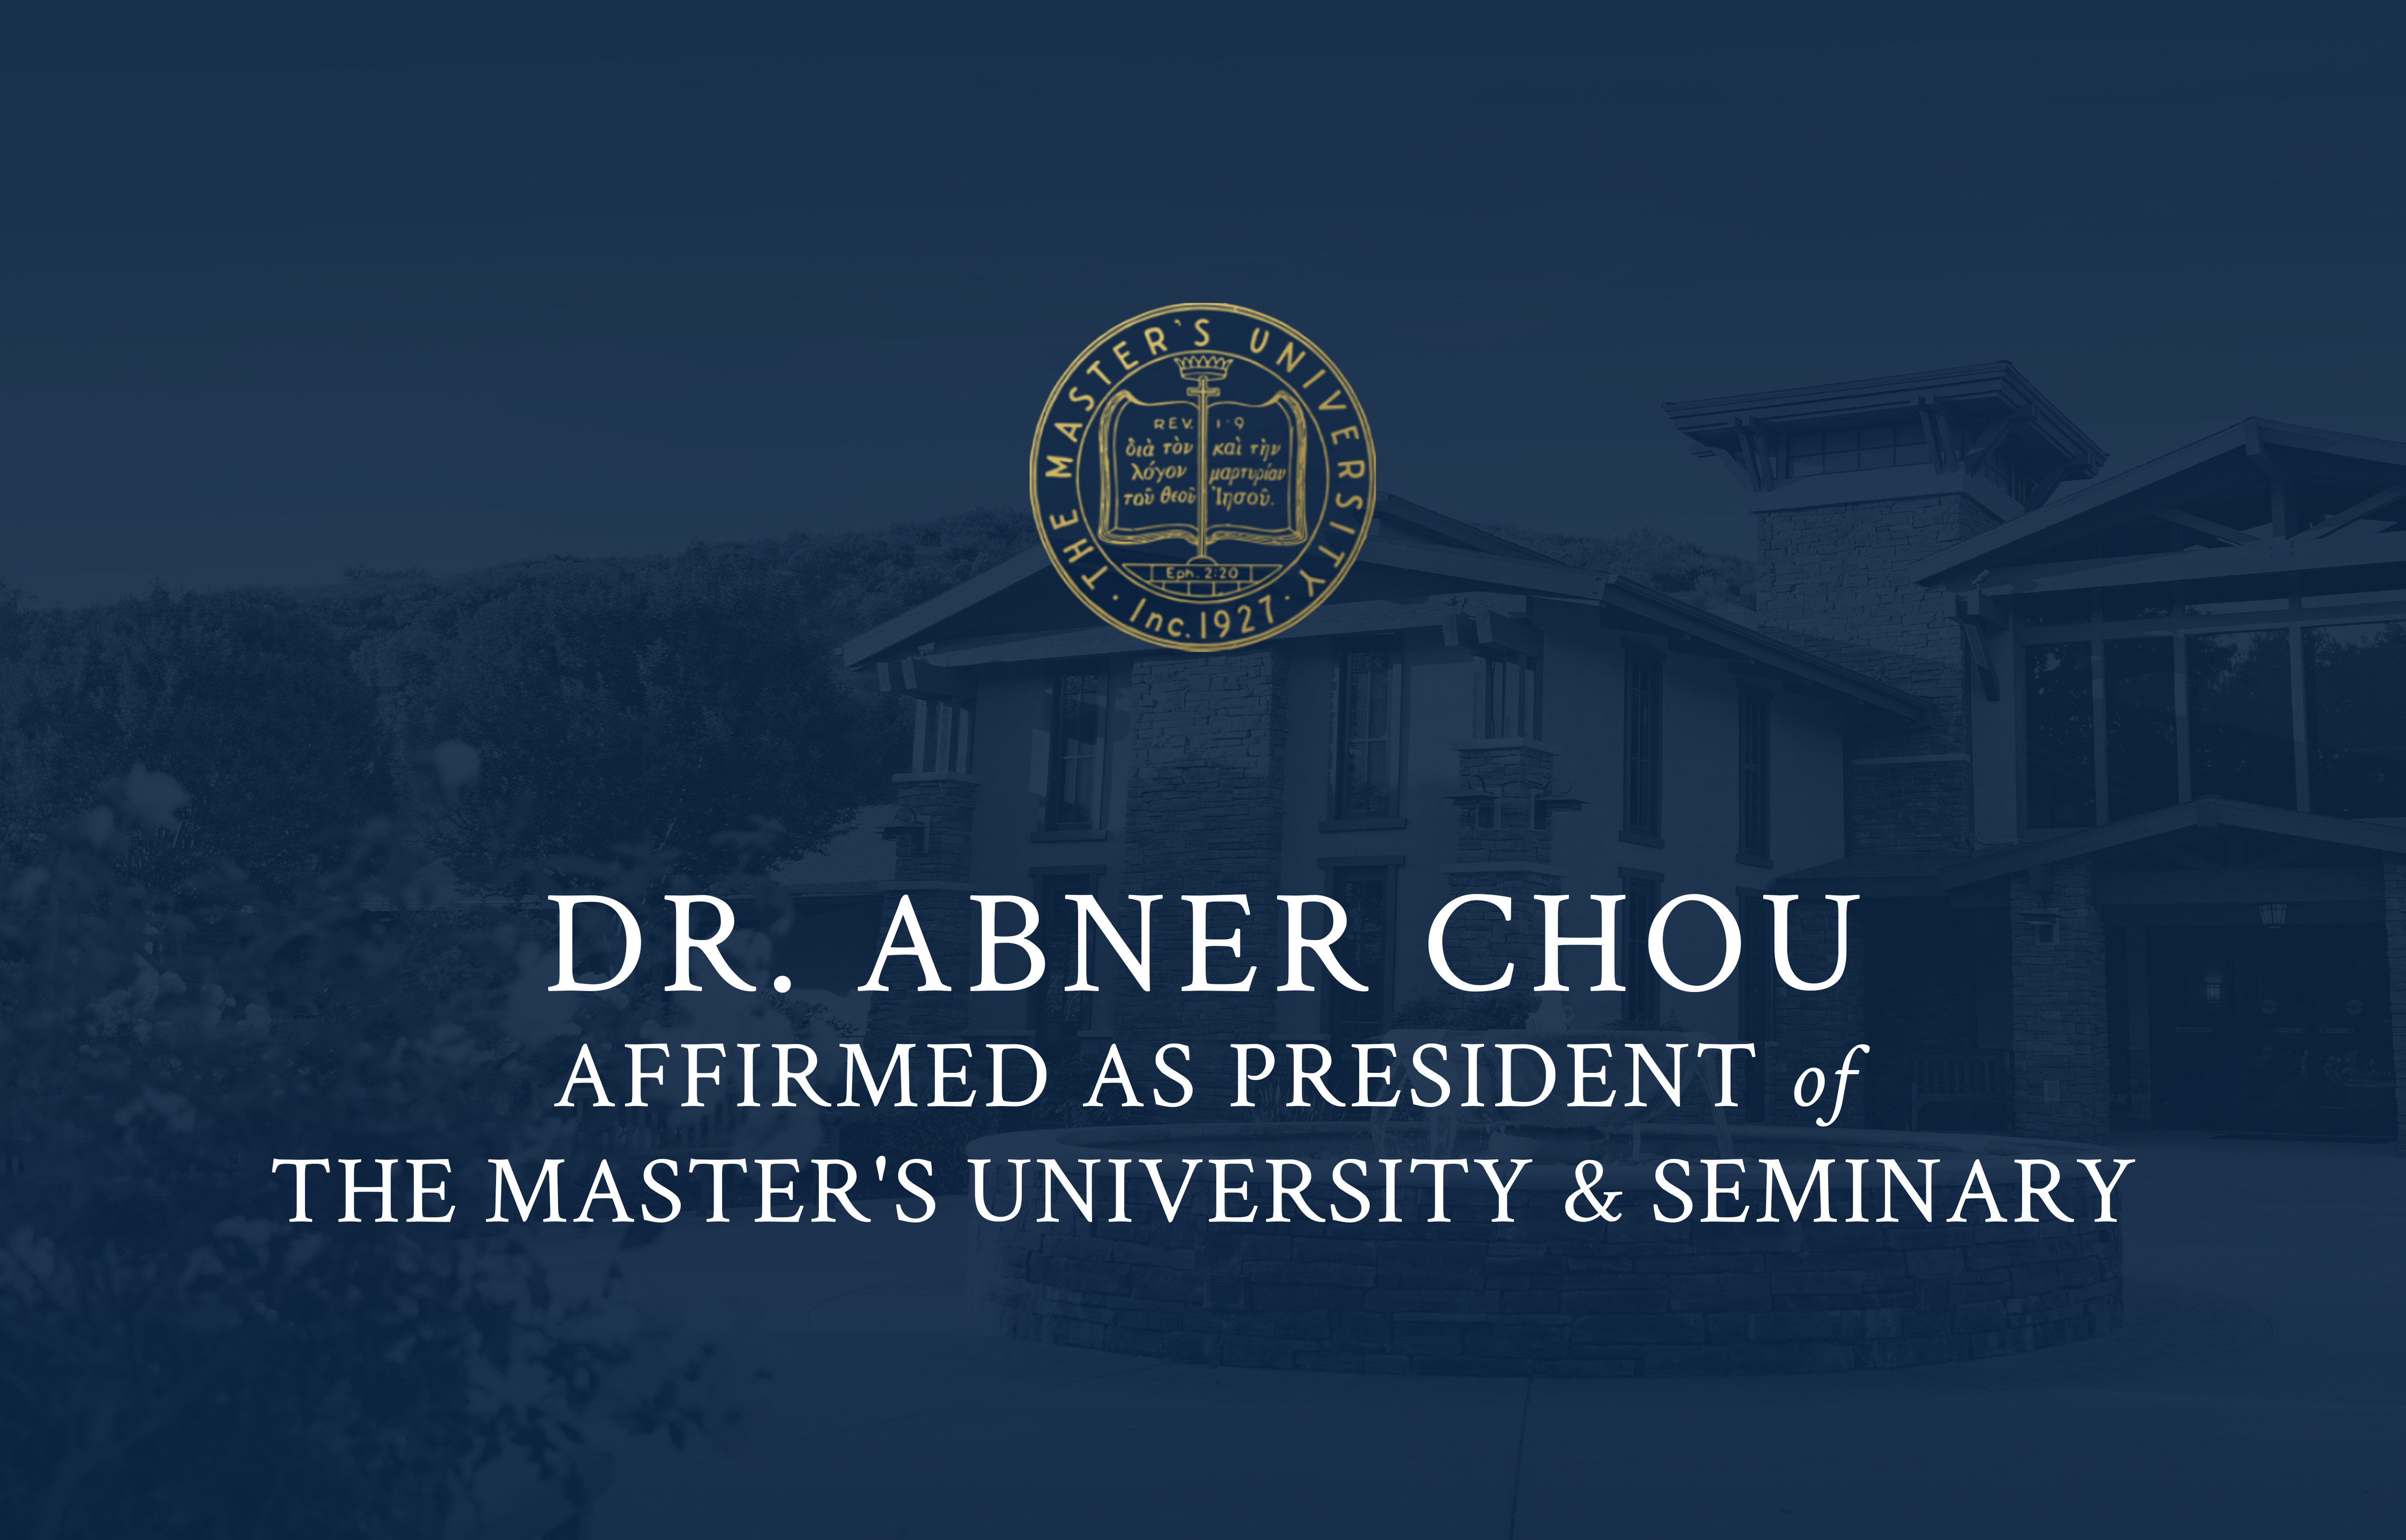 Dr. Abner Chou Affirmed as President of The Master's University & Seminary image